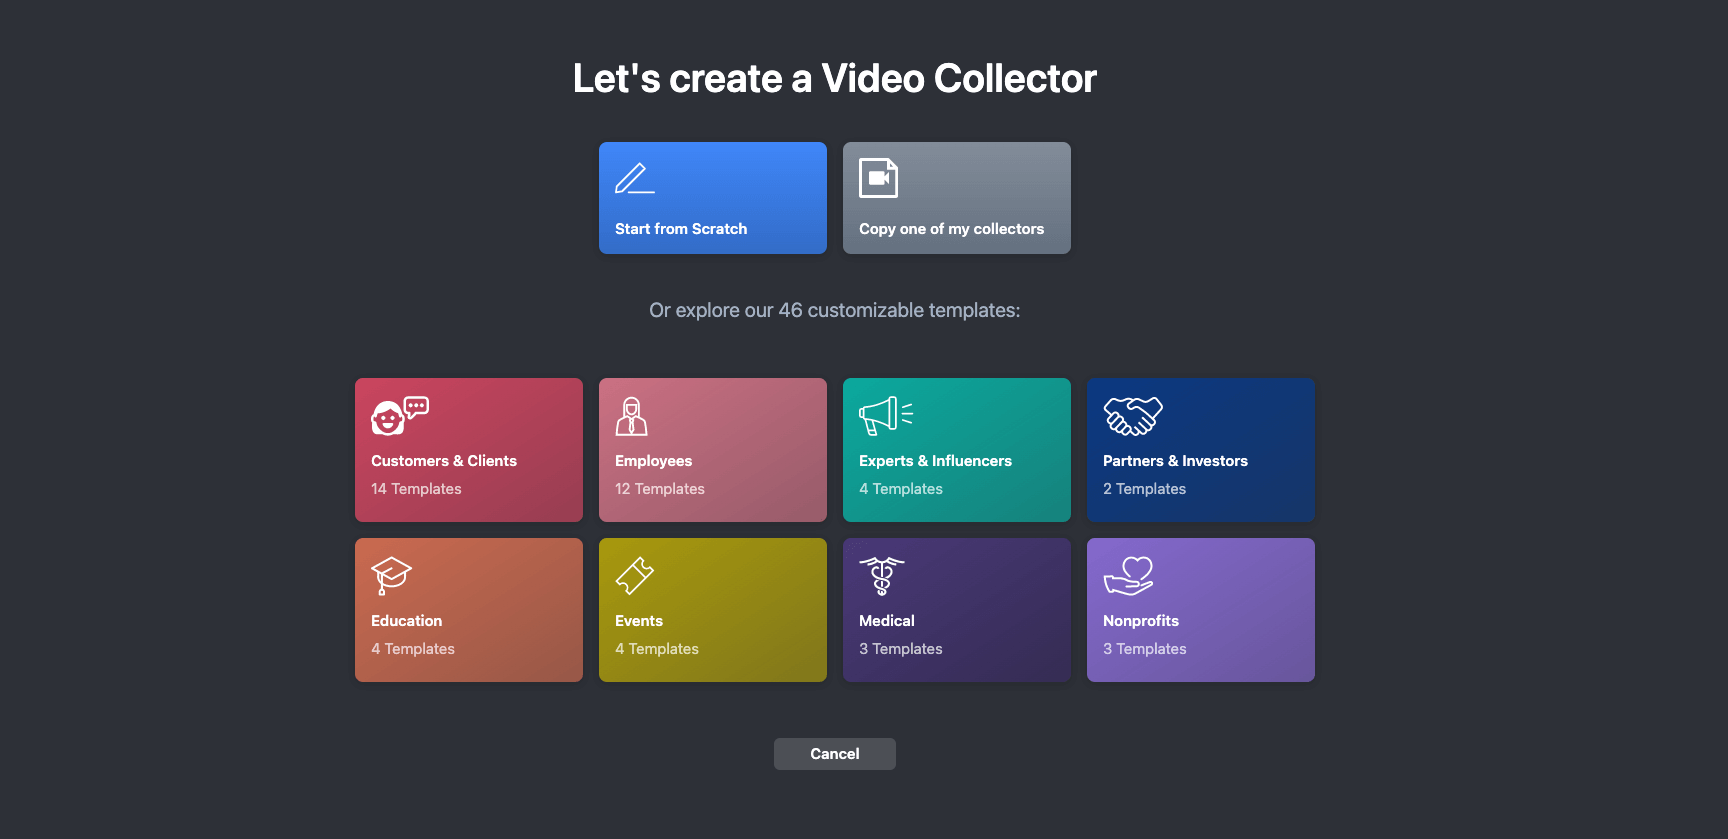 Vocal Video Video Collector: Templates organized by industry